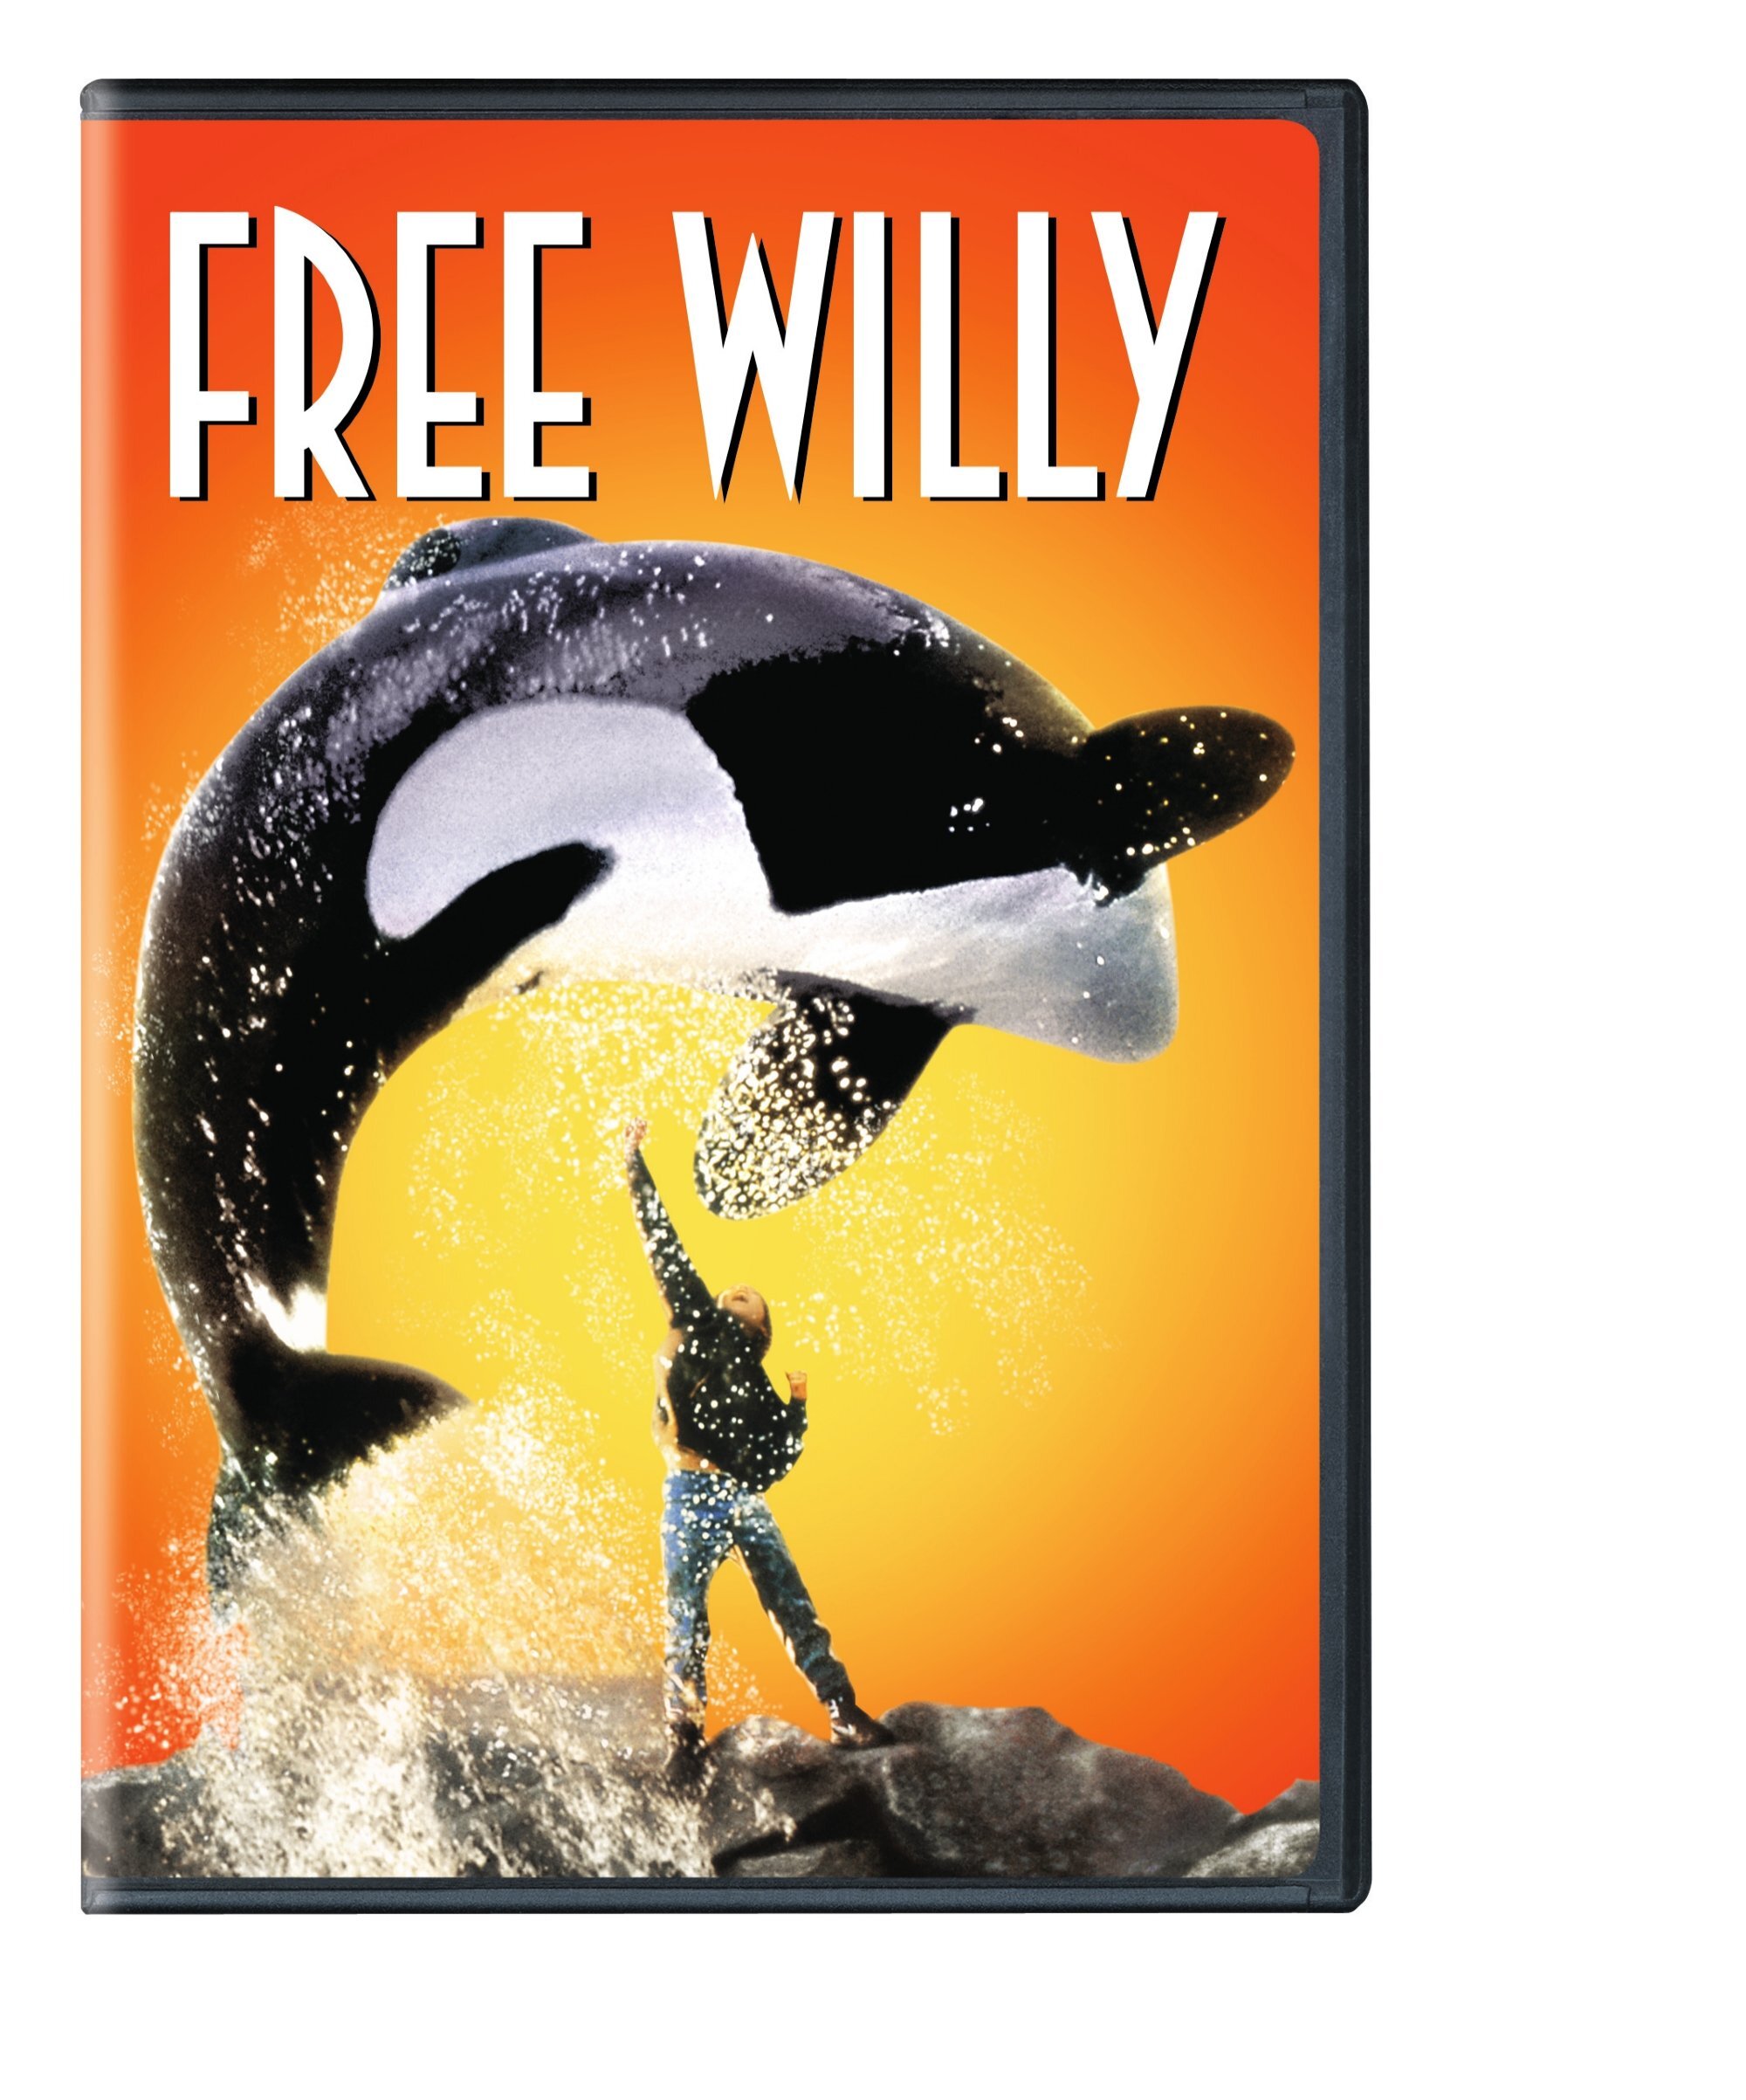 Free Willy (10th Anniversary Edition) - DVD [ 1993 ]  - Drama Movies On DVD - Movies On GRUV